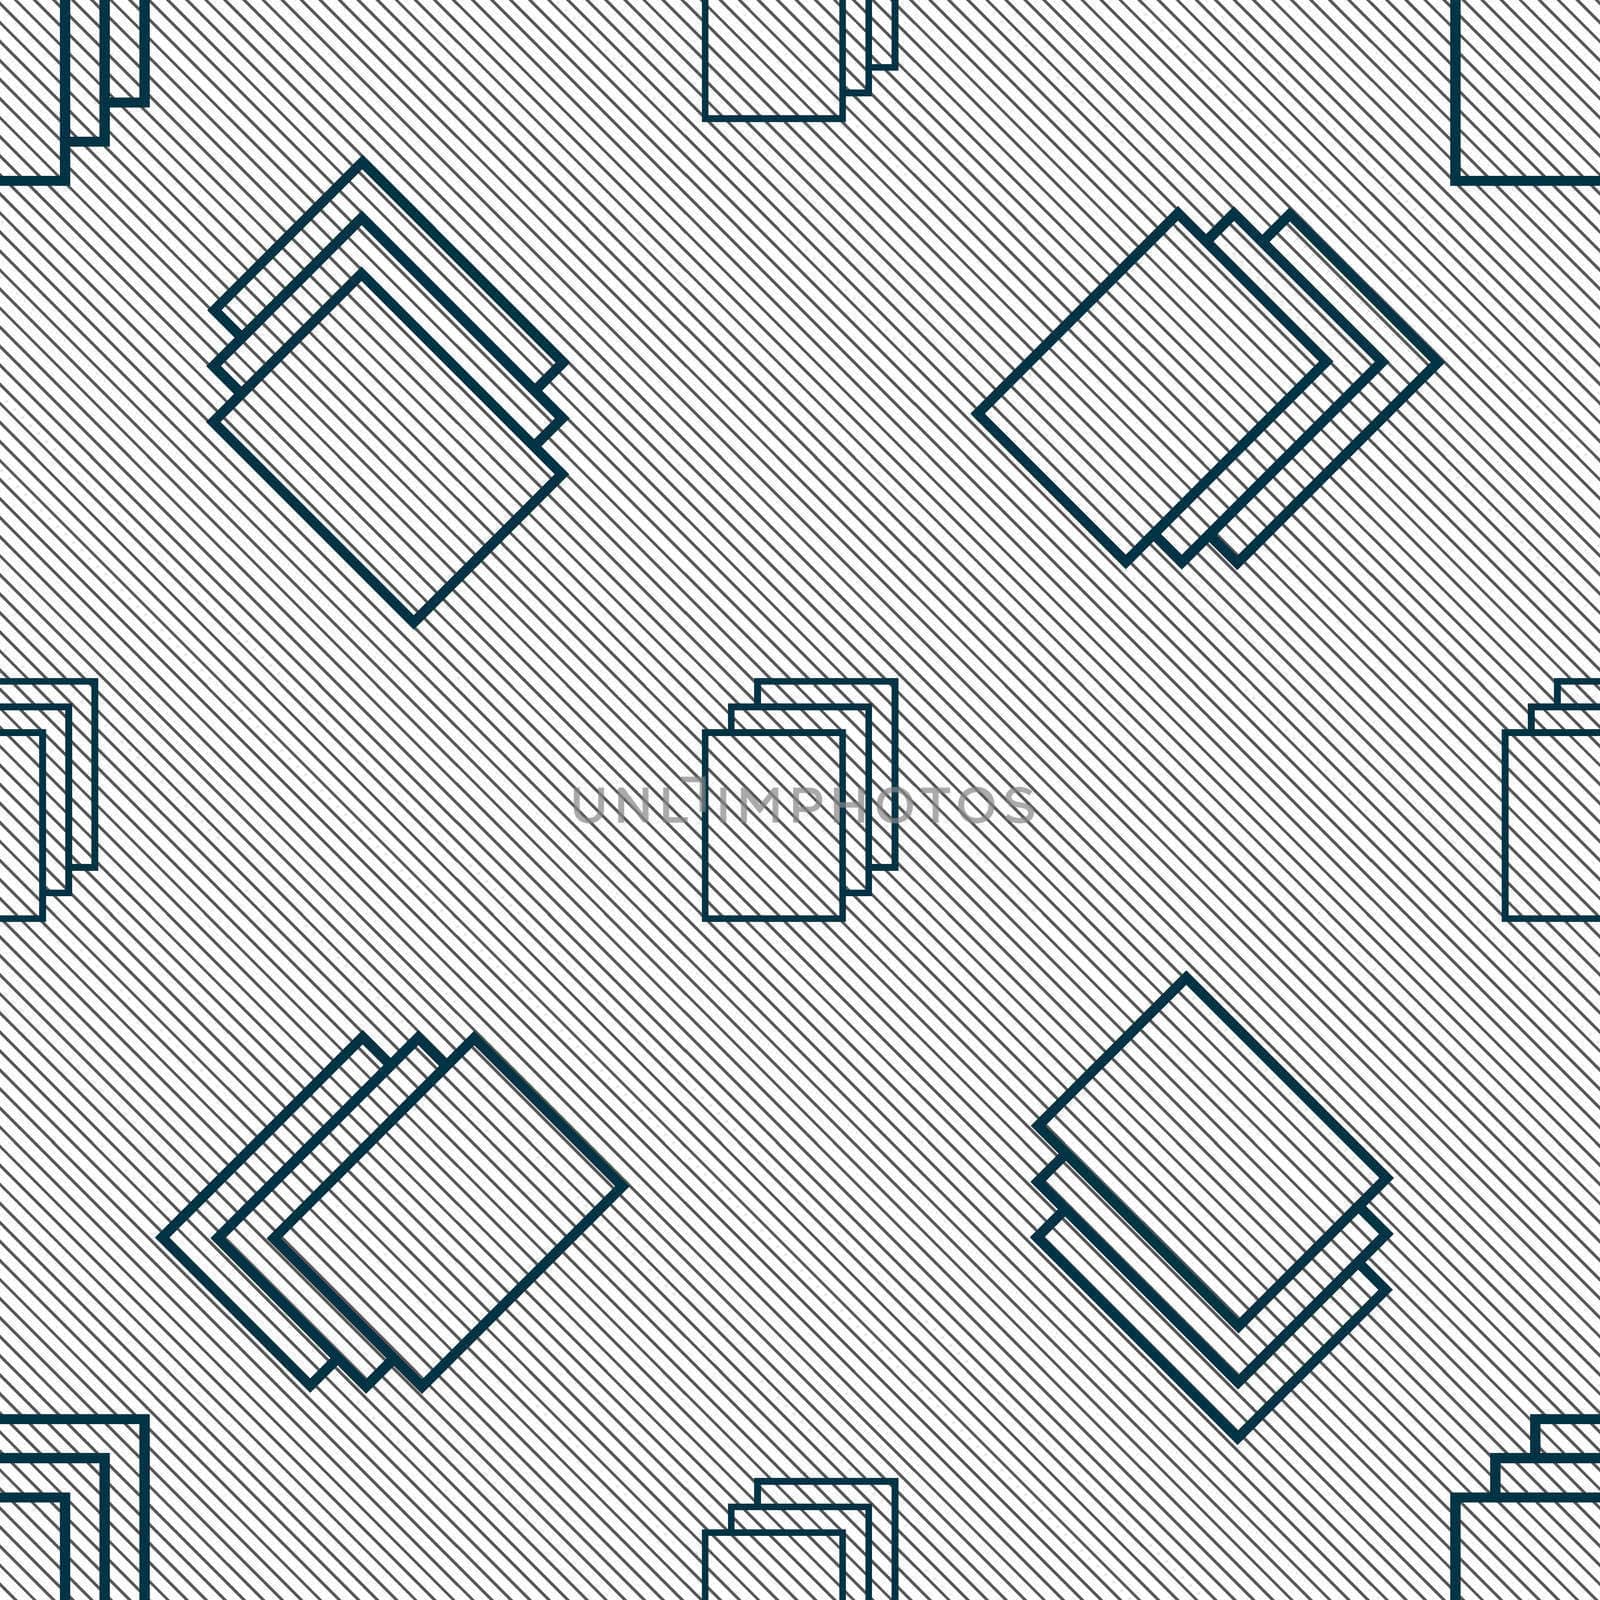 Copy file sign icon. Duplicate document symbol. Seamless pattern with geometric texture.  by serhii_lohvyniuk